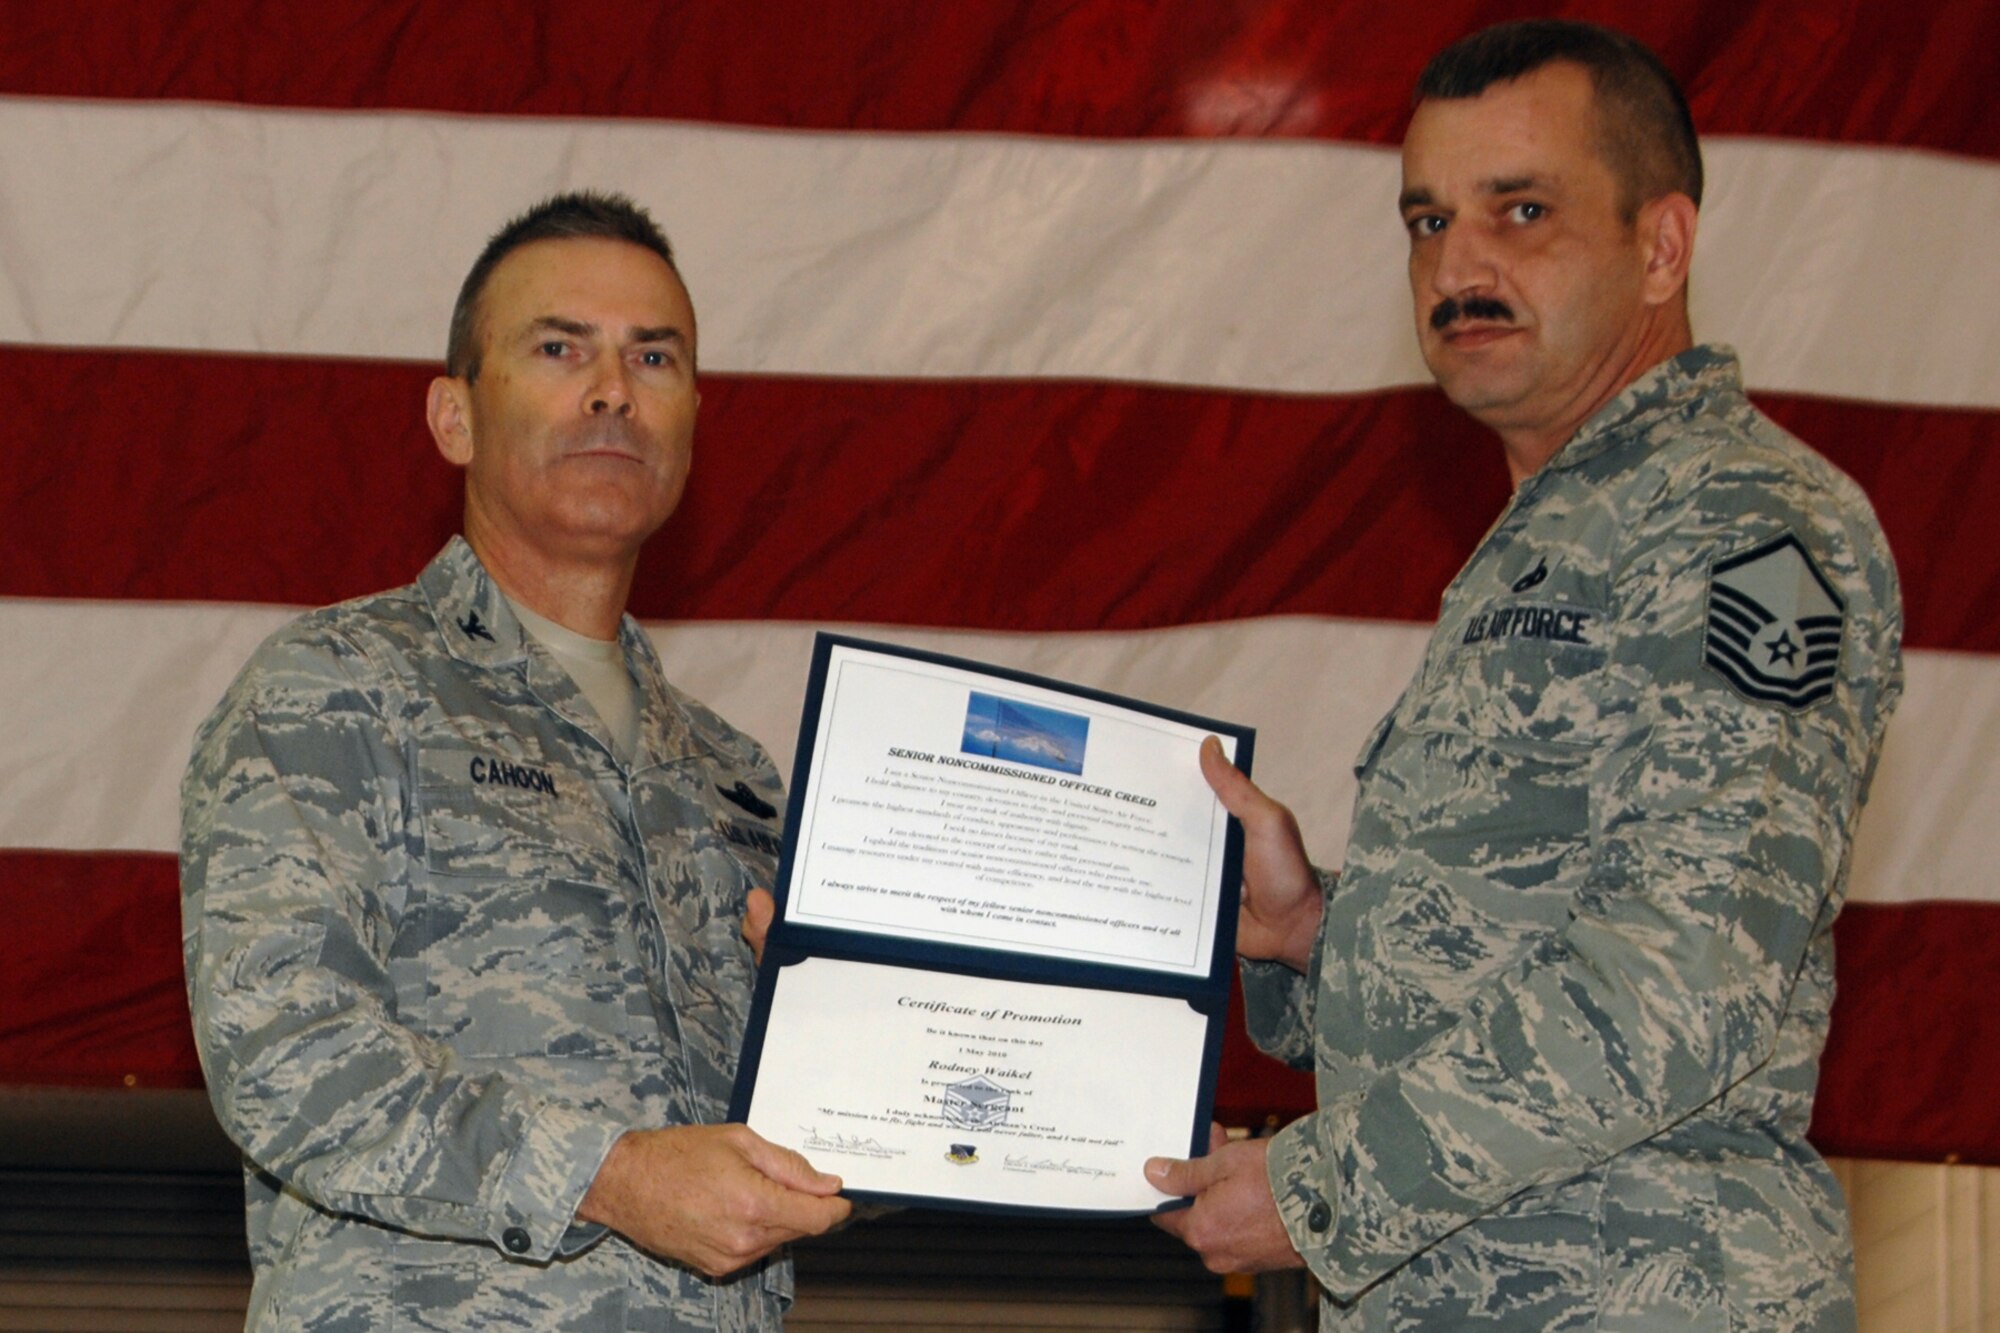 GRISSOM AIR RESERVE BASE, Ind. -- Master Sgt. Rodney Waikel is presented with a certificate of promotion by Col. William T. "Tim" Cahoon during a special induction ceremony held here during the November unit training assembly. Sergeant Waikel, pneudraulic systems supervisor with the 434th Maintenance Squadron, and two other Grissom Airmen were inducted into the senior noncommissioned officer ranks. Colonel Cahoon is the 434th Air Refueling Wing commander. (U.S. Air Force photo/Senior Airman Carl Berry)
